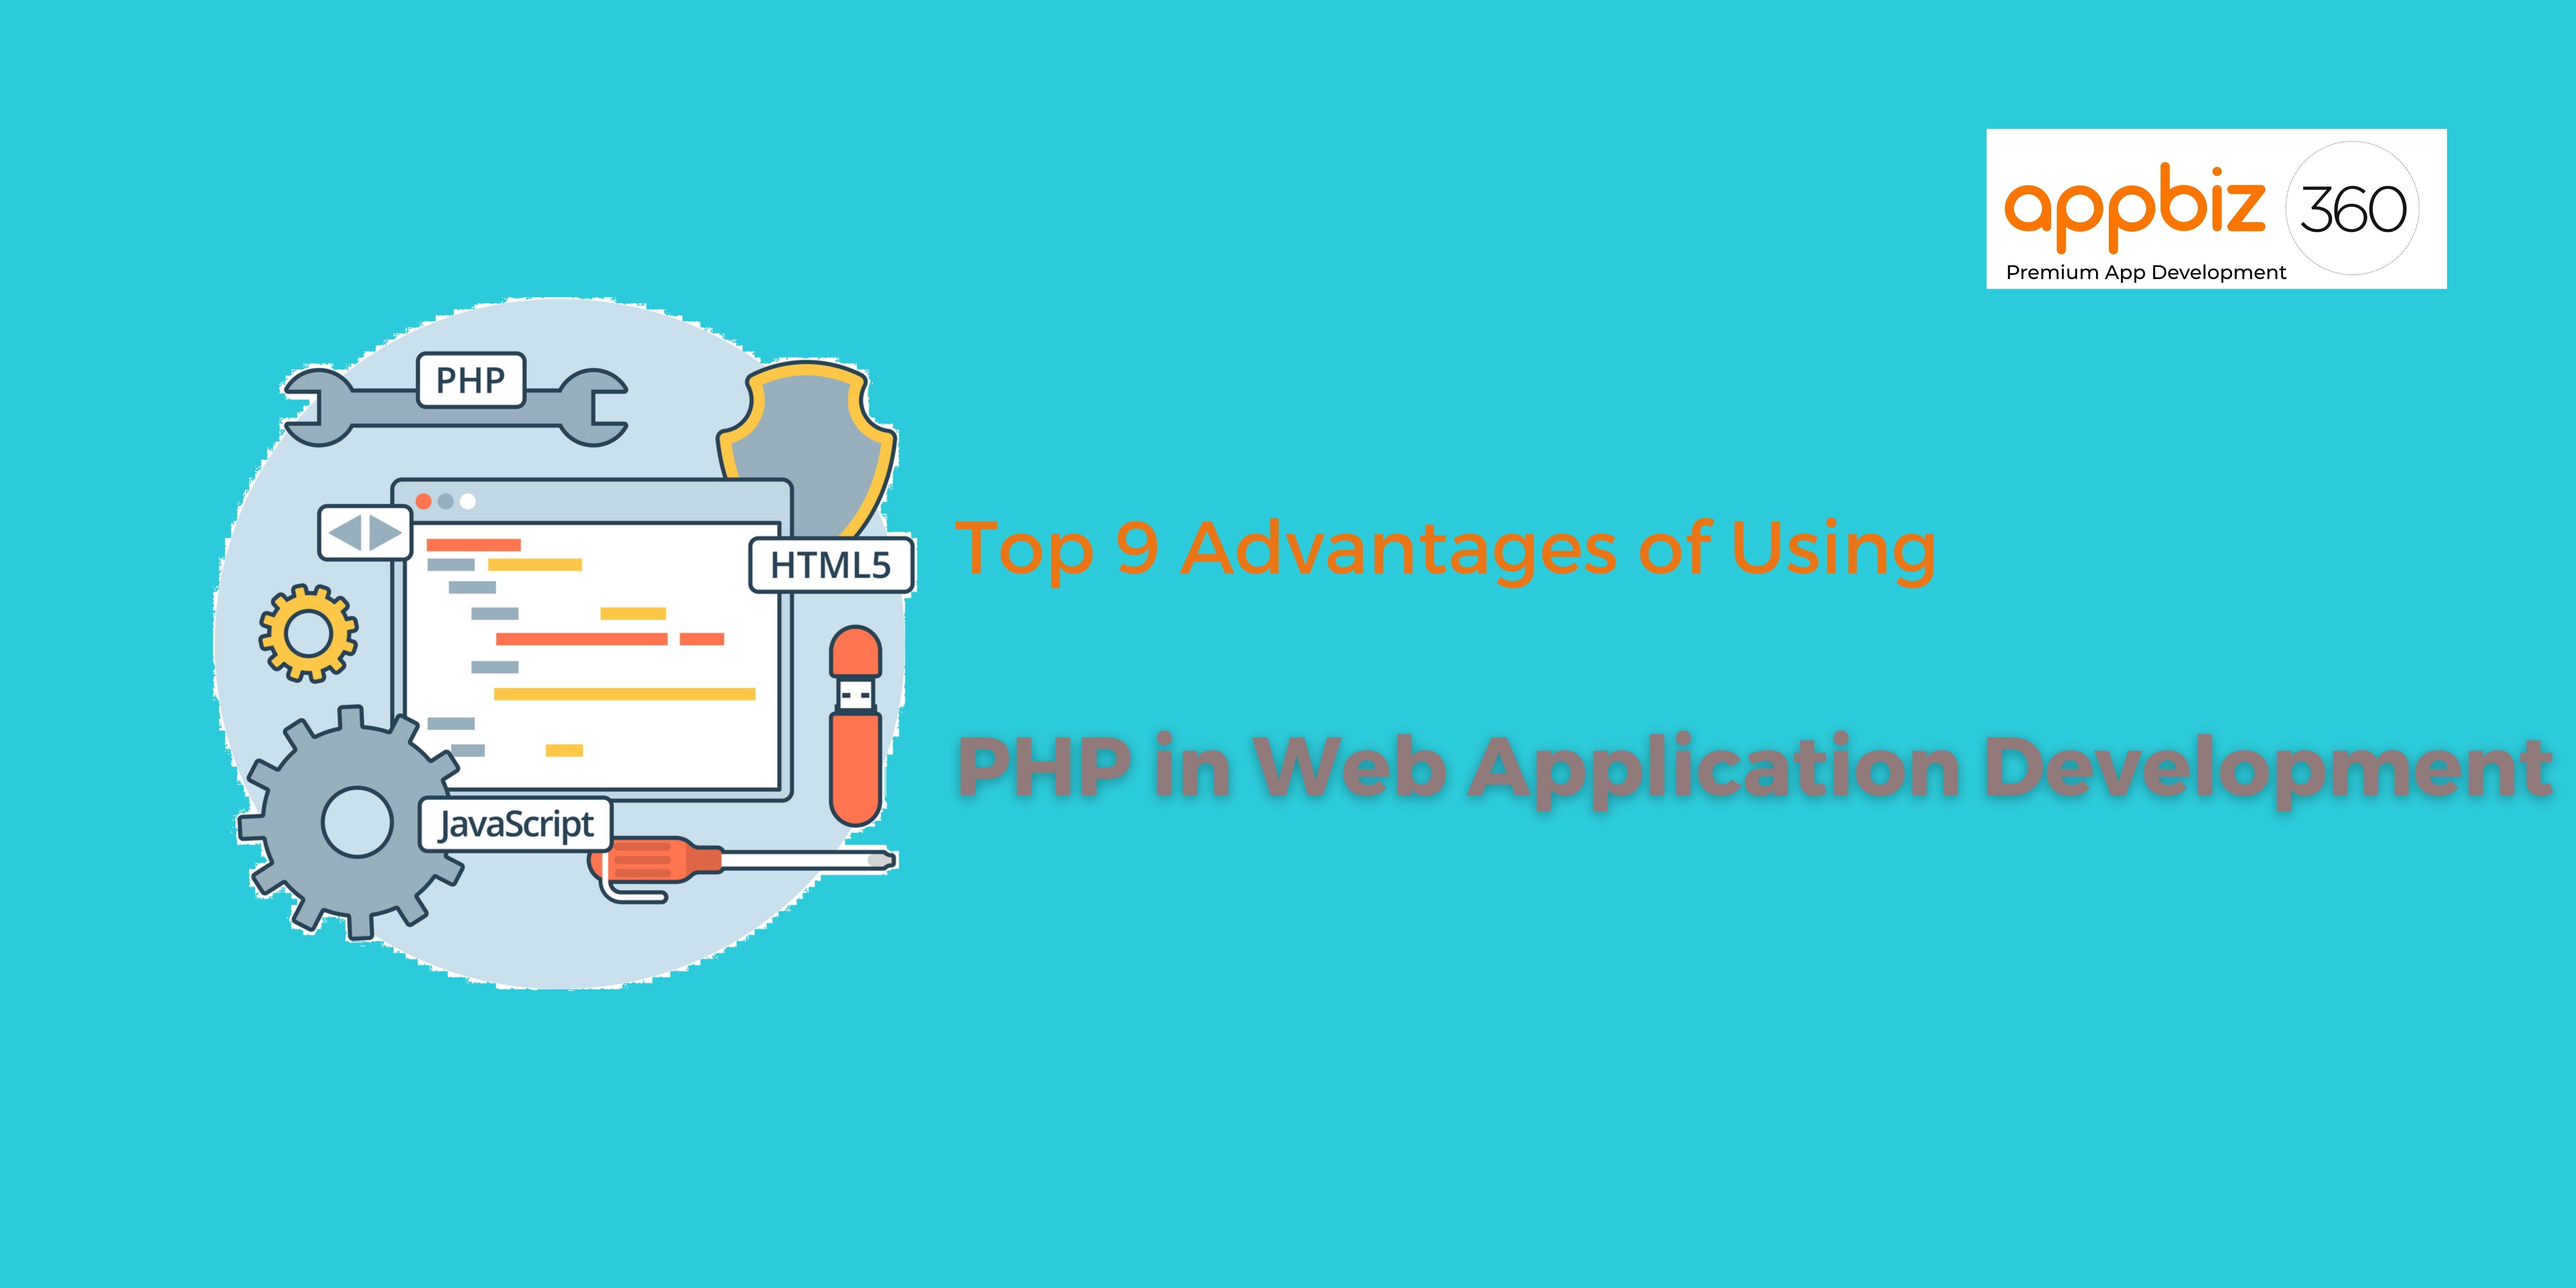 Top 9 Advantages of Using PHP in Web Application Development